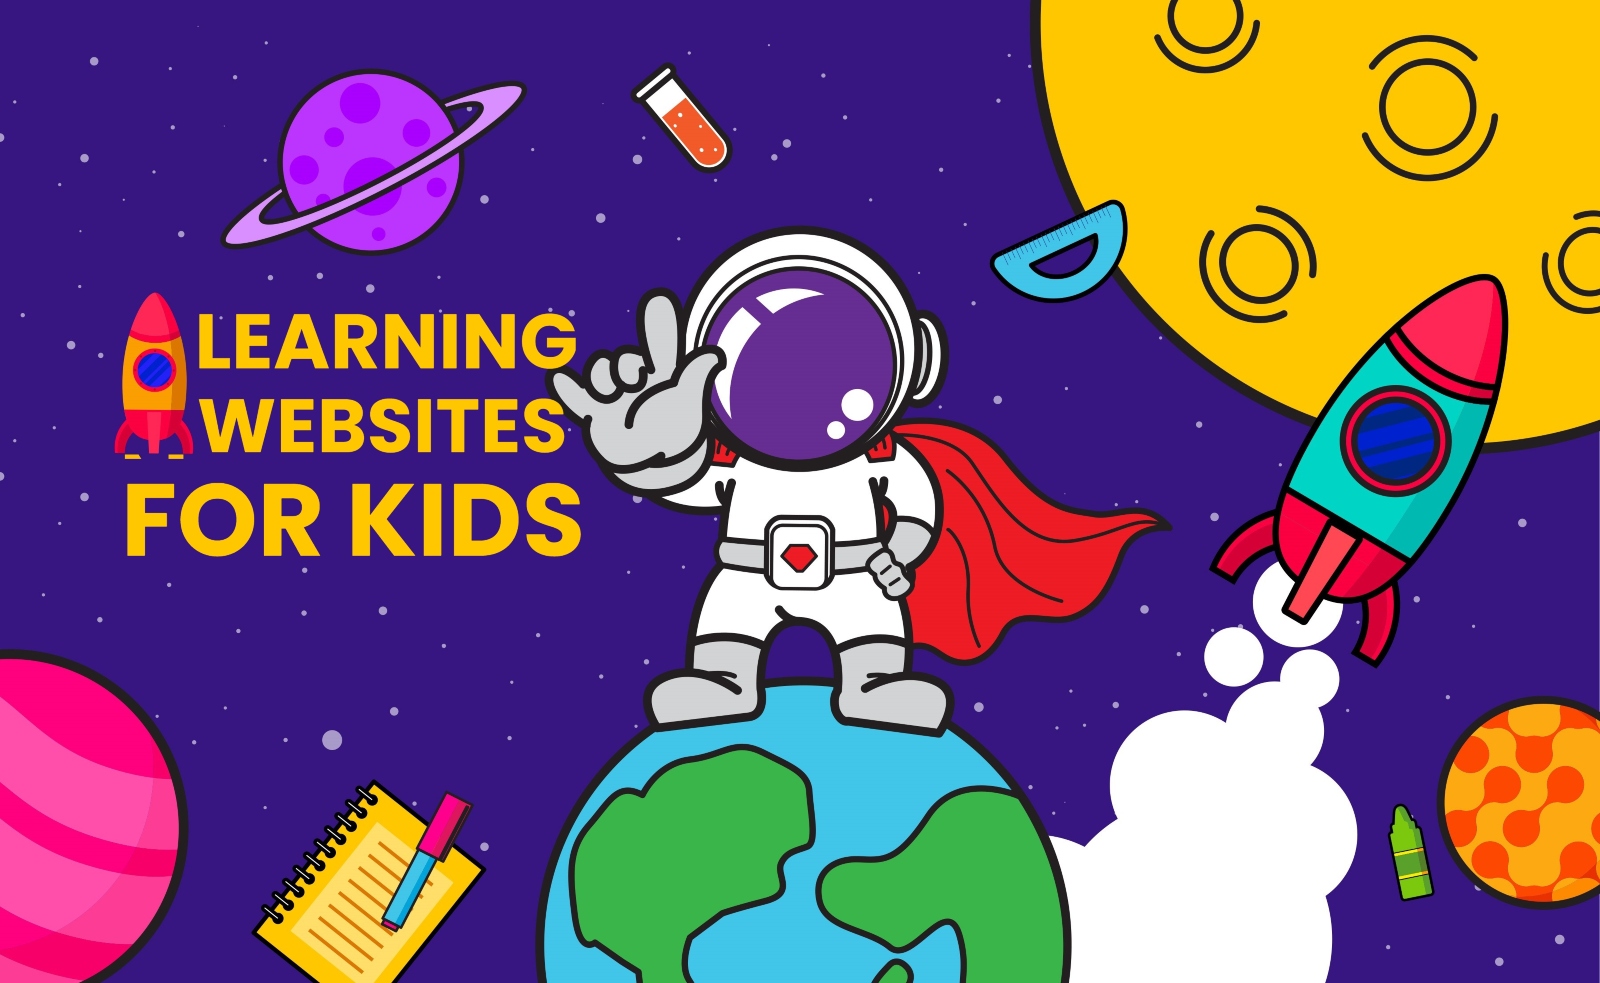 Learning websites for kids, most are free